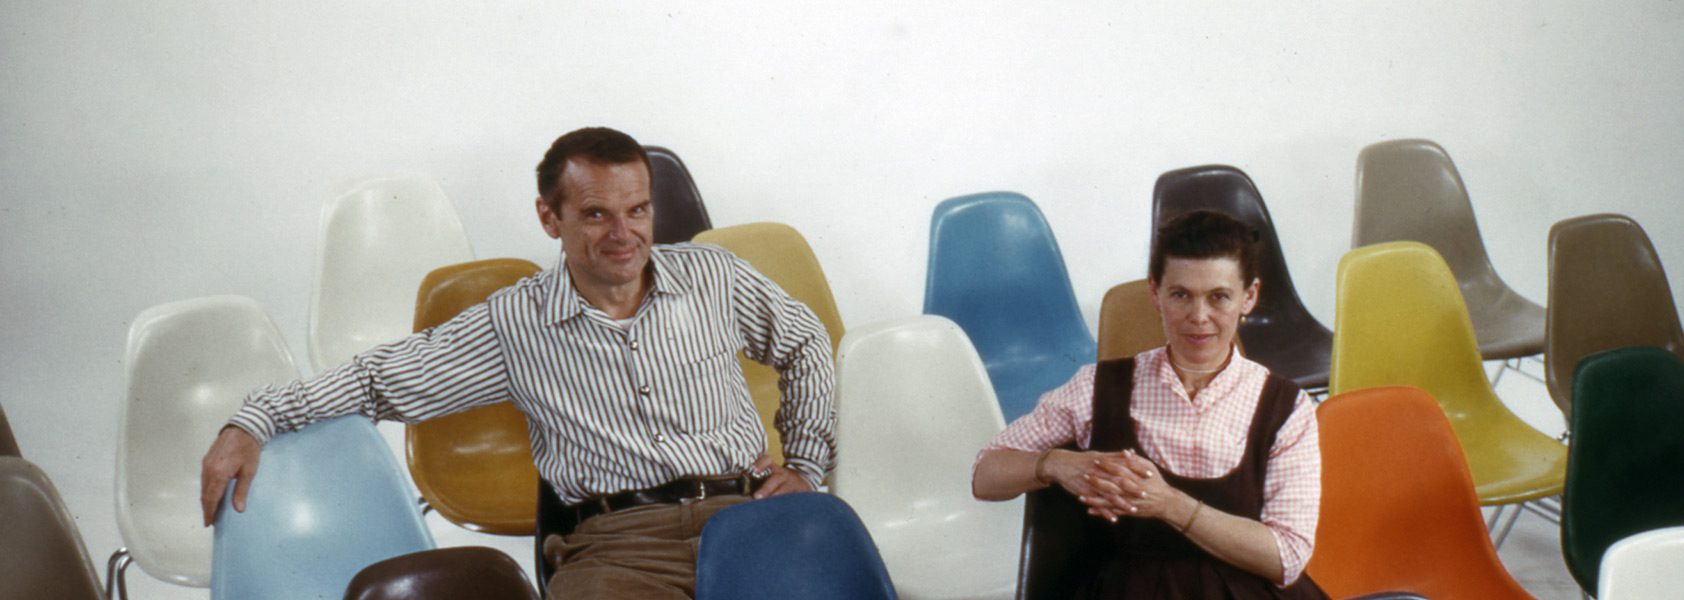 Charles and Ray Eames